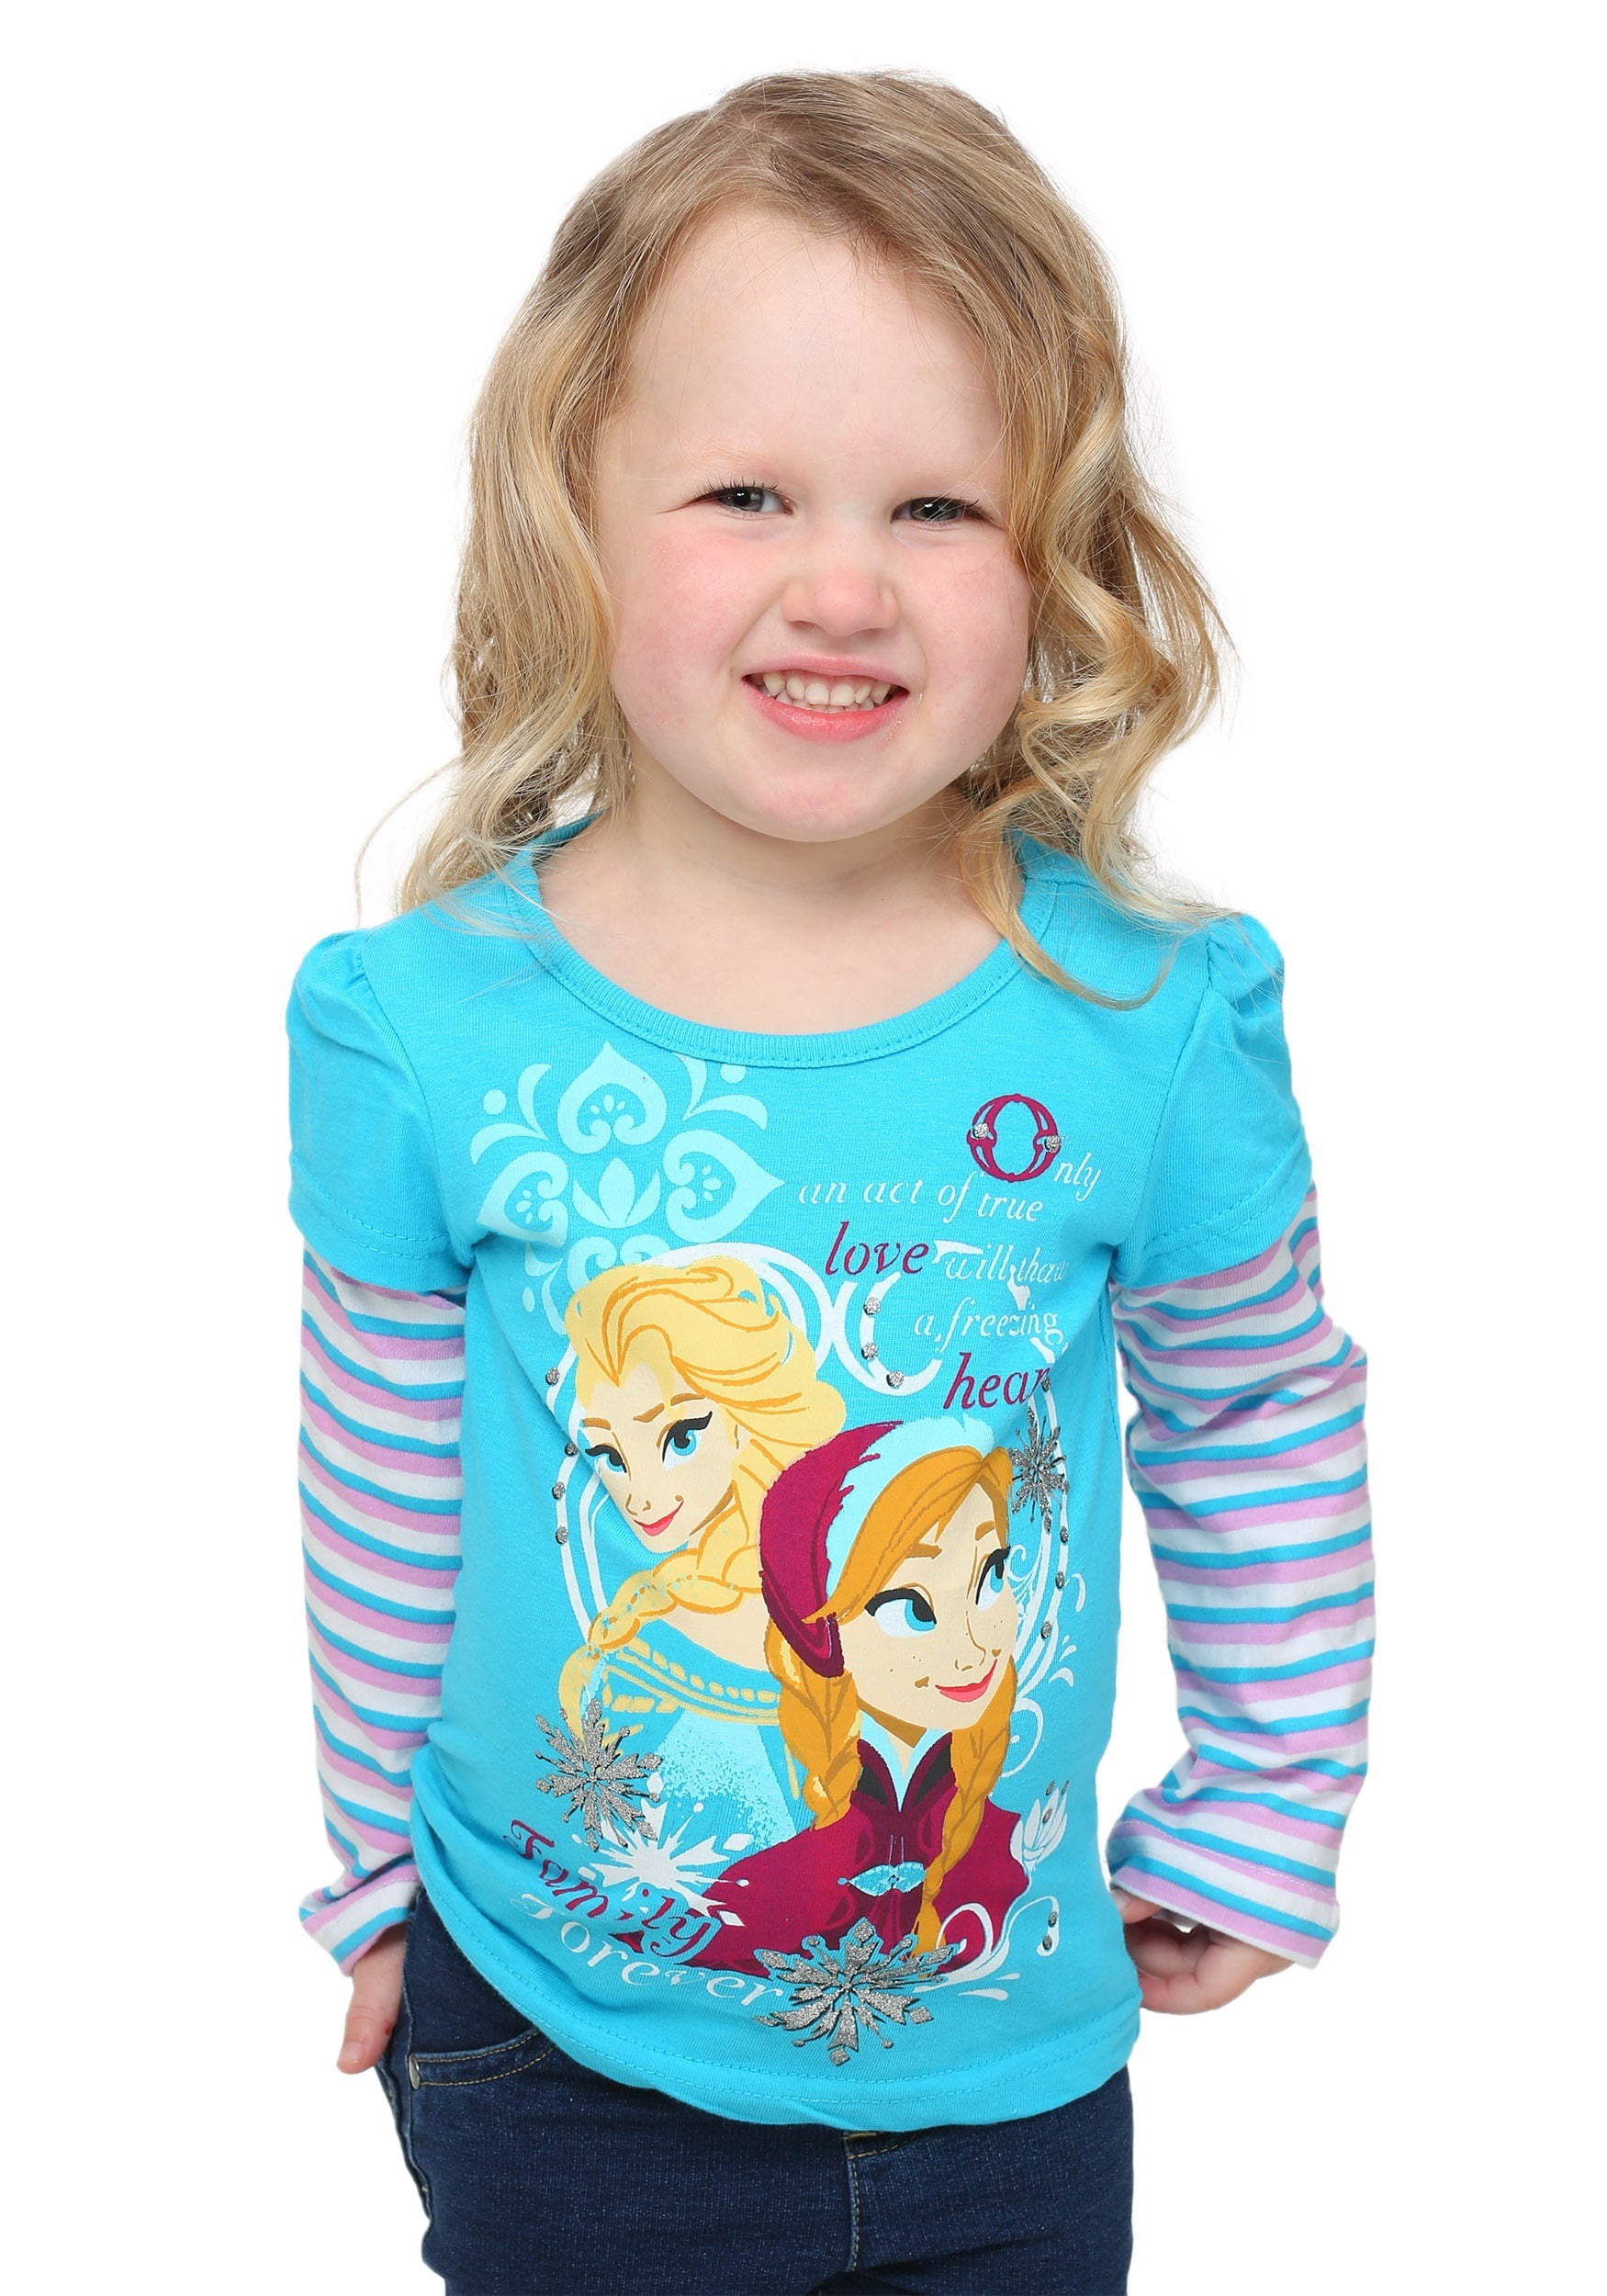 Details about   NWT 2T Disney Frozen Anna Elsa Olaf Snowflakes Toddler Girl Graphic T SHIRT PINK 